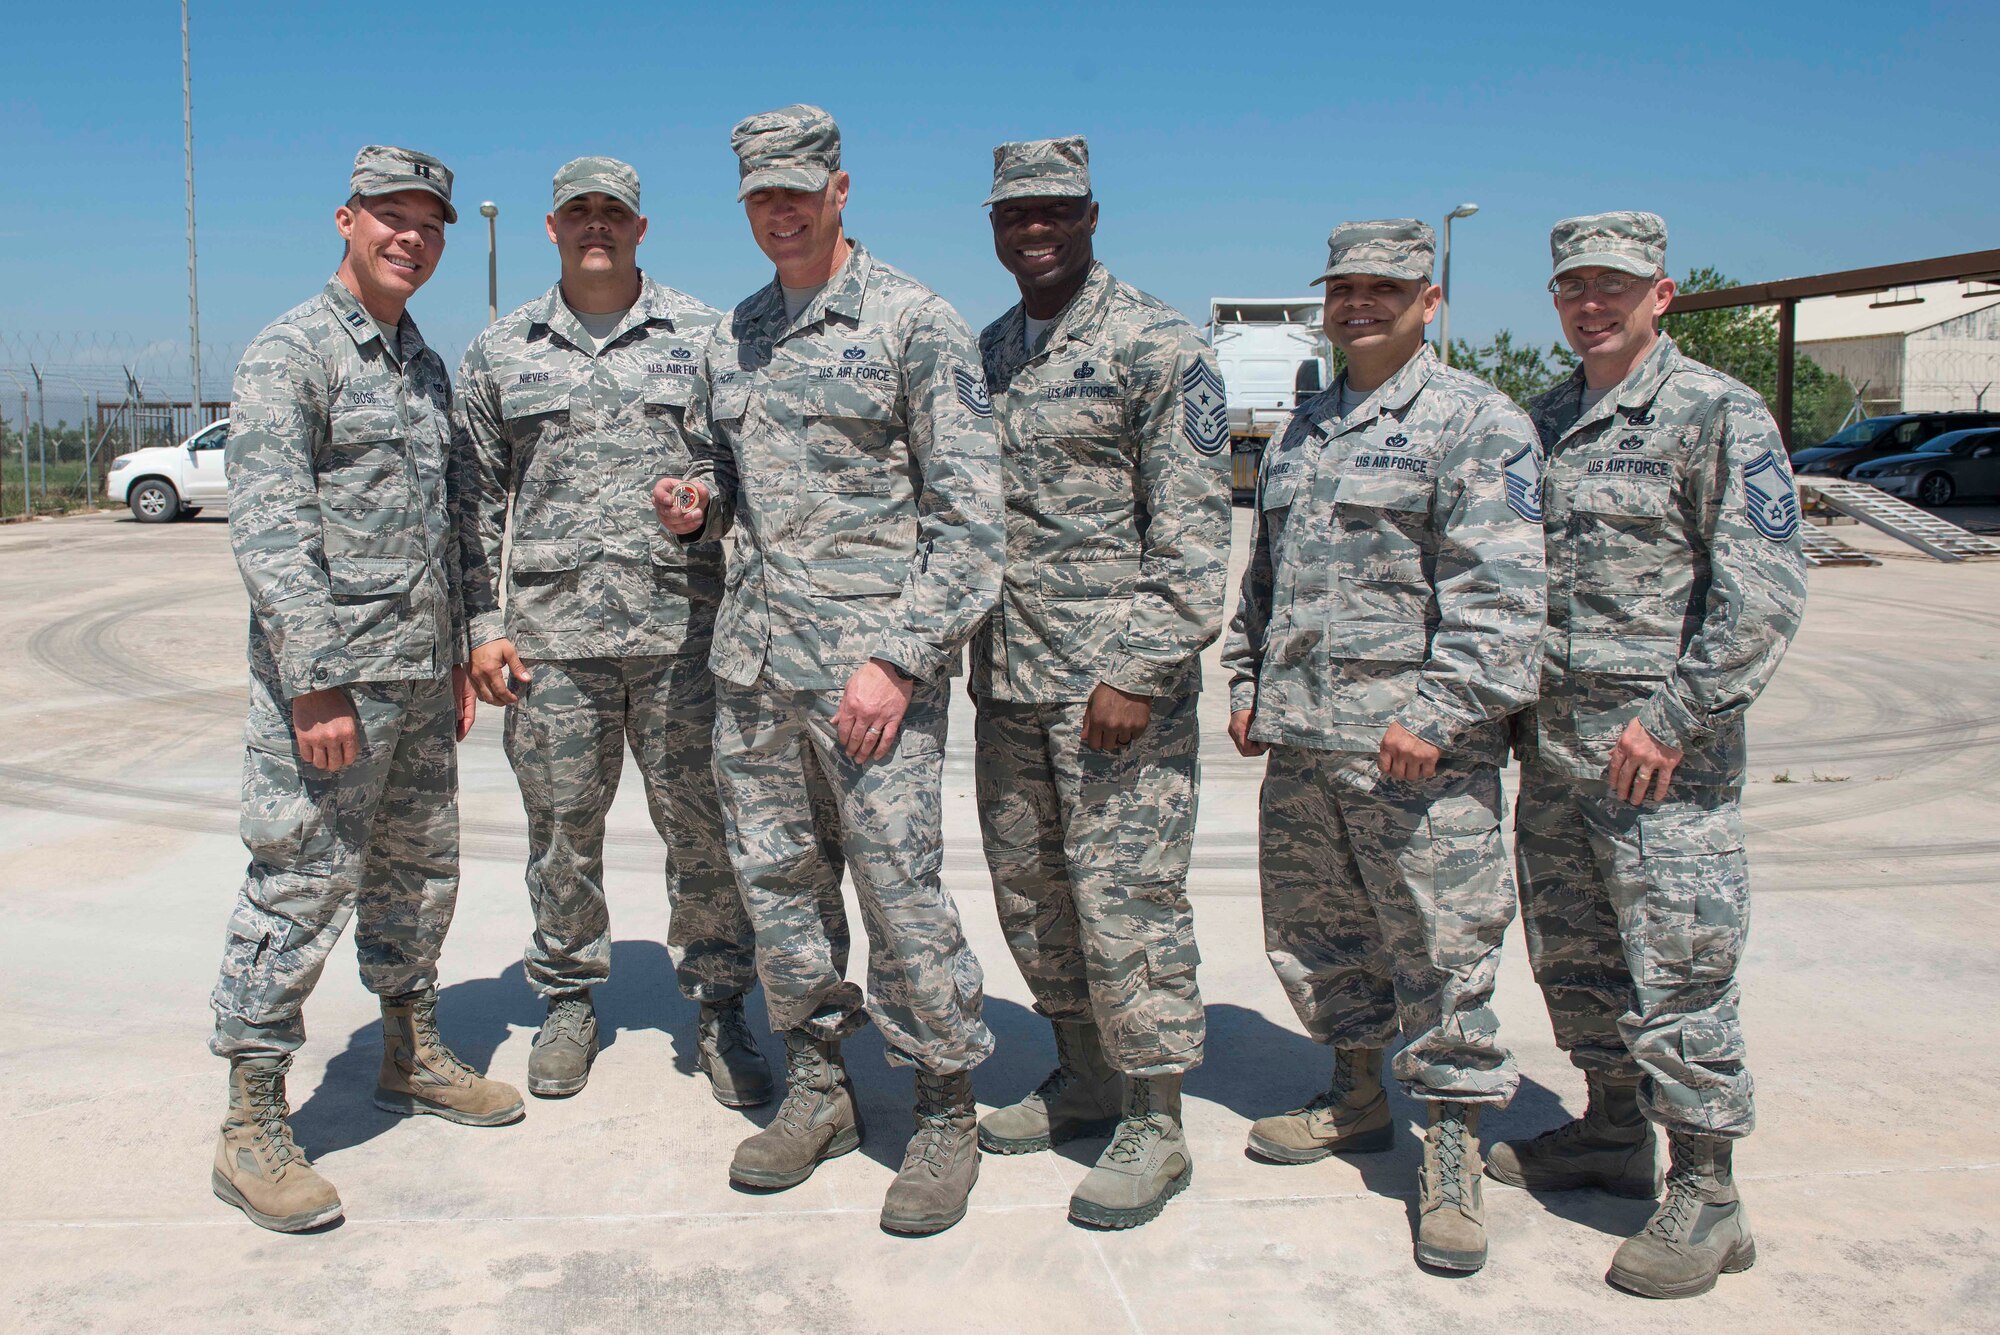 U.S. Air Force Chief Master Sgt. Vegas Clark, 39th Air Base Wing command chief, stands with 39th Civil Engineer Squadron Airmen, April 25, 2016, at Incirlik Air Base, Turkey. Clark met with the 39th CES quality assurance flight to view and learn more about the tasks they accomplish. (U.S. Air Force photo by Senior Airman John Nieves Camacho/Released)